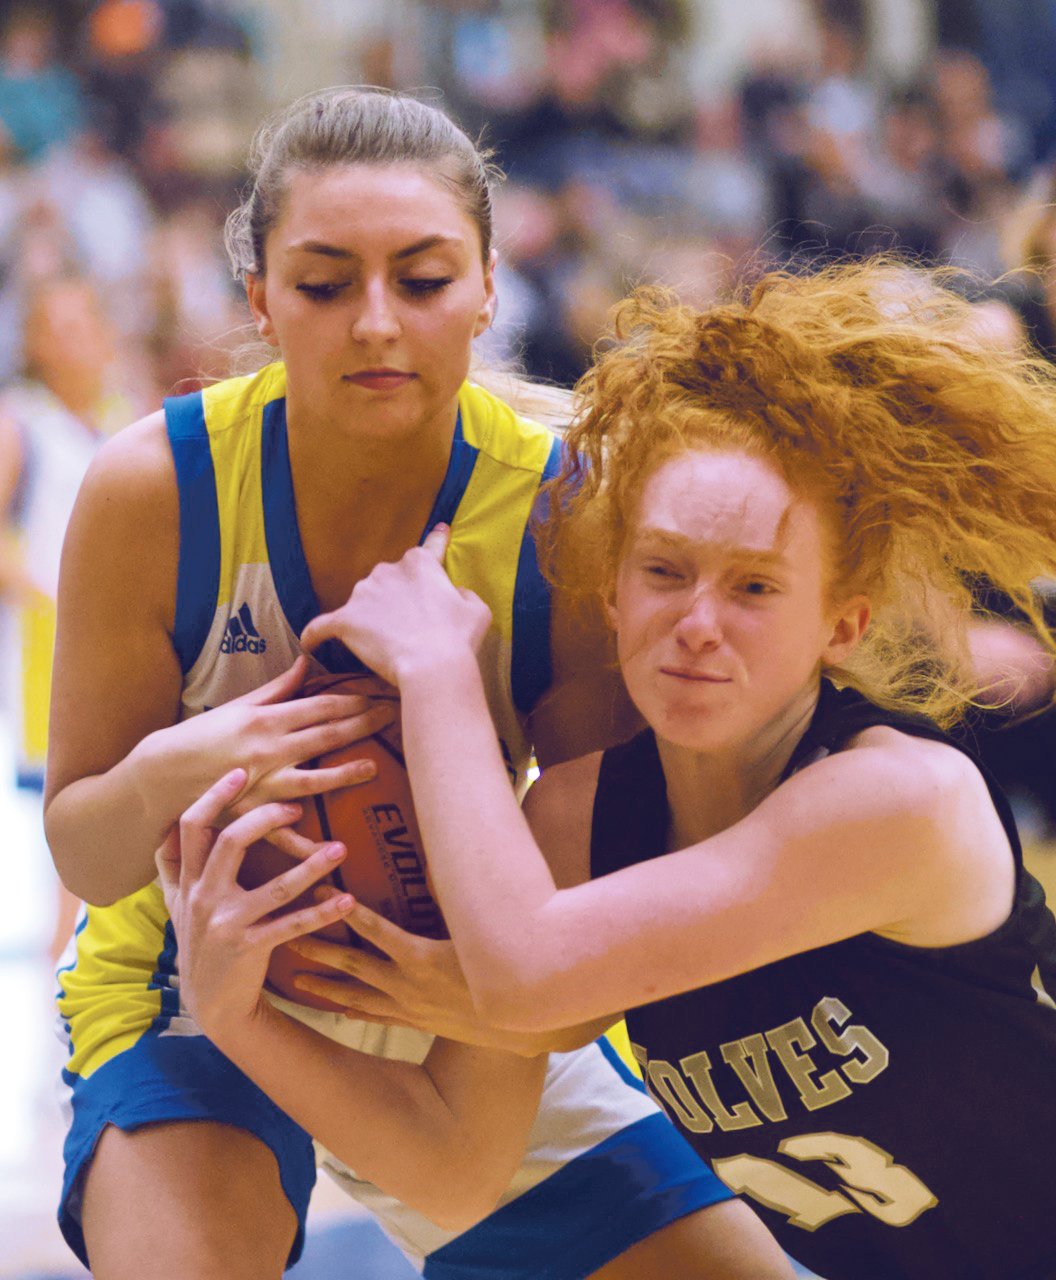 Crawfordsville's Megan Simmons fights for the ball.